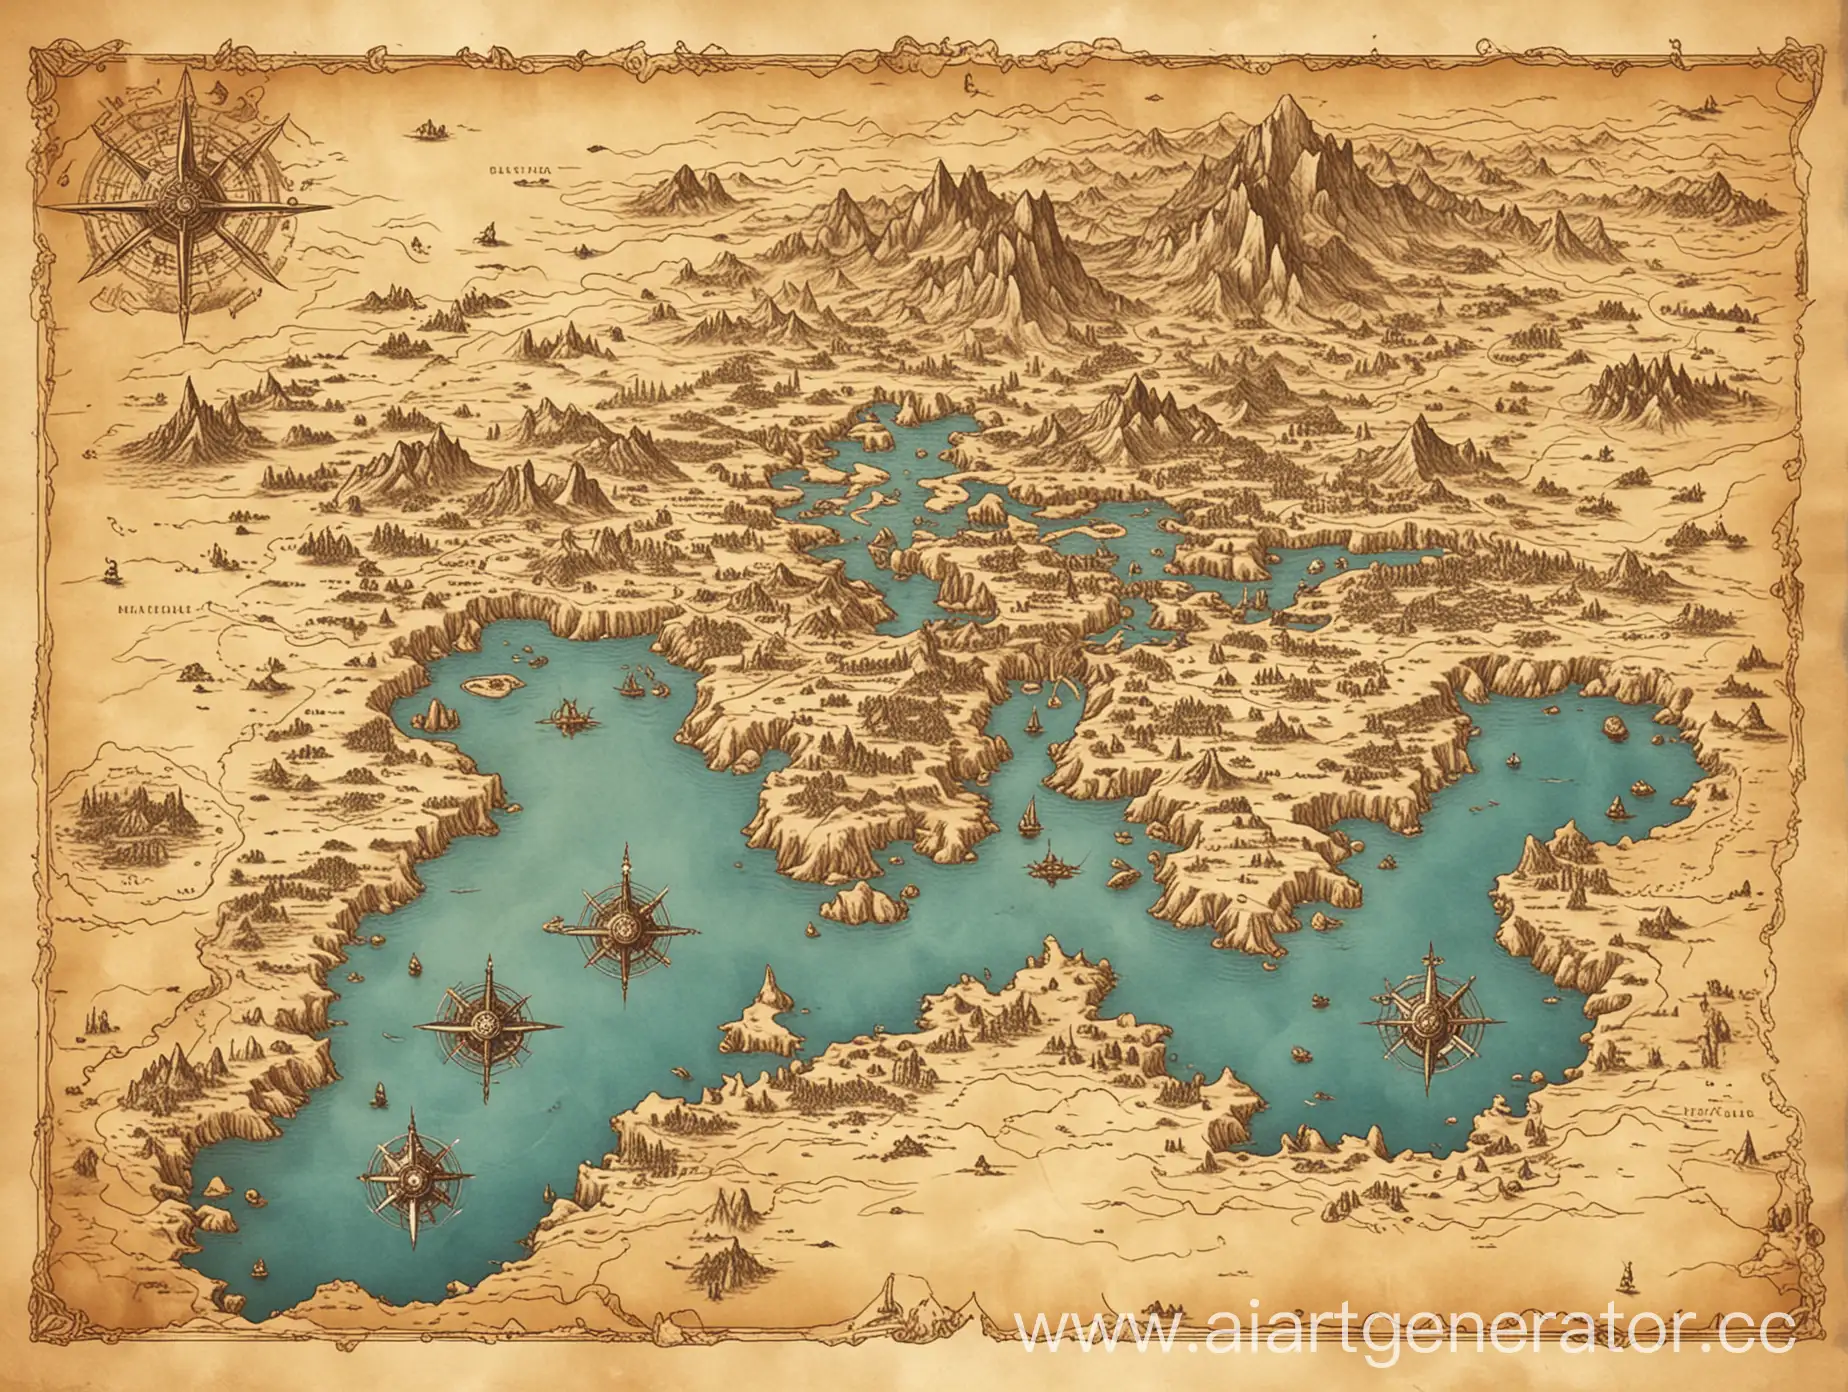 Fantasy-Map-TopDown-View-of-Ancient-Archipelago-on-Aged-Parchment